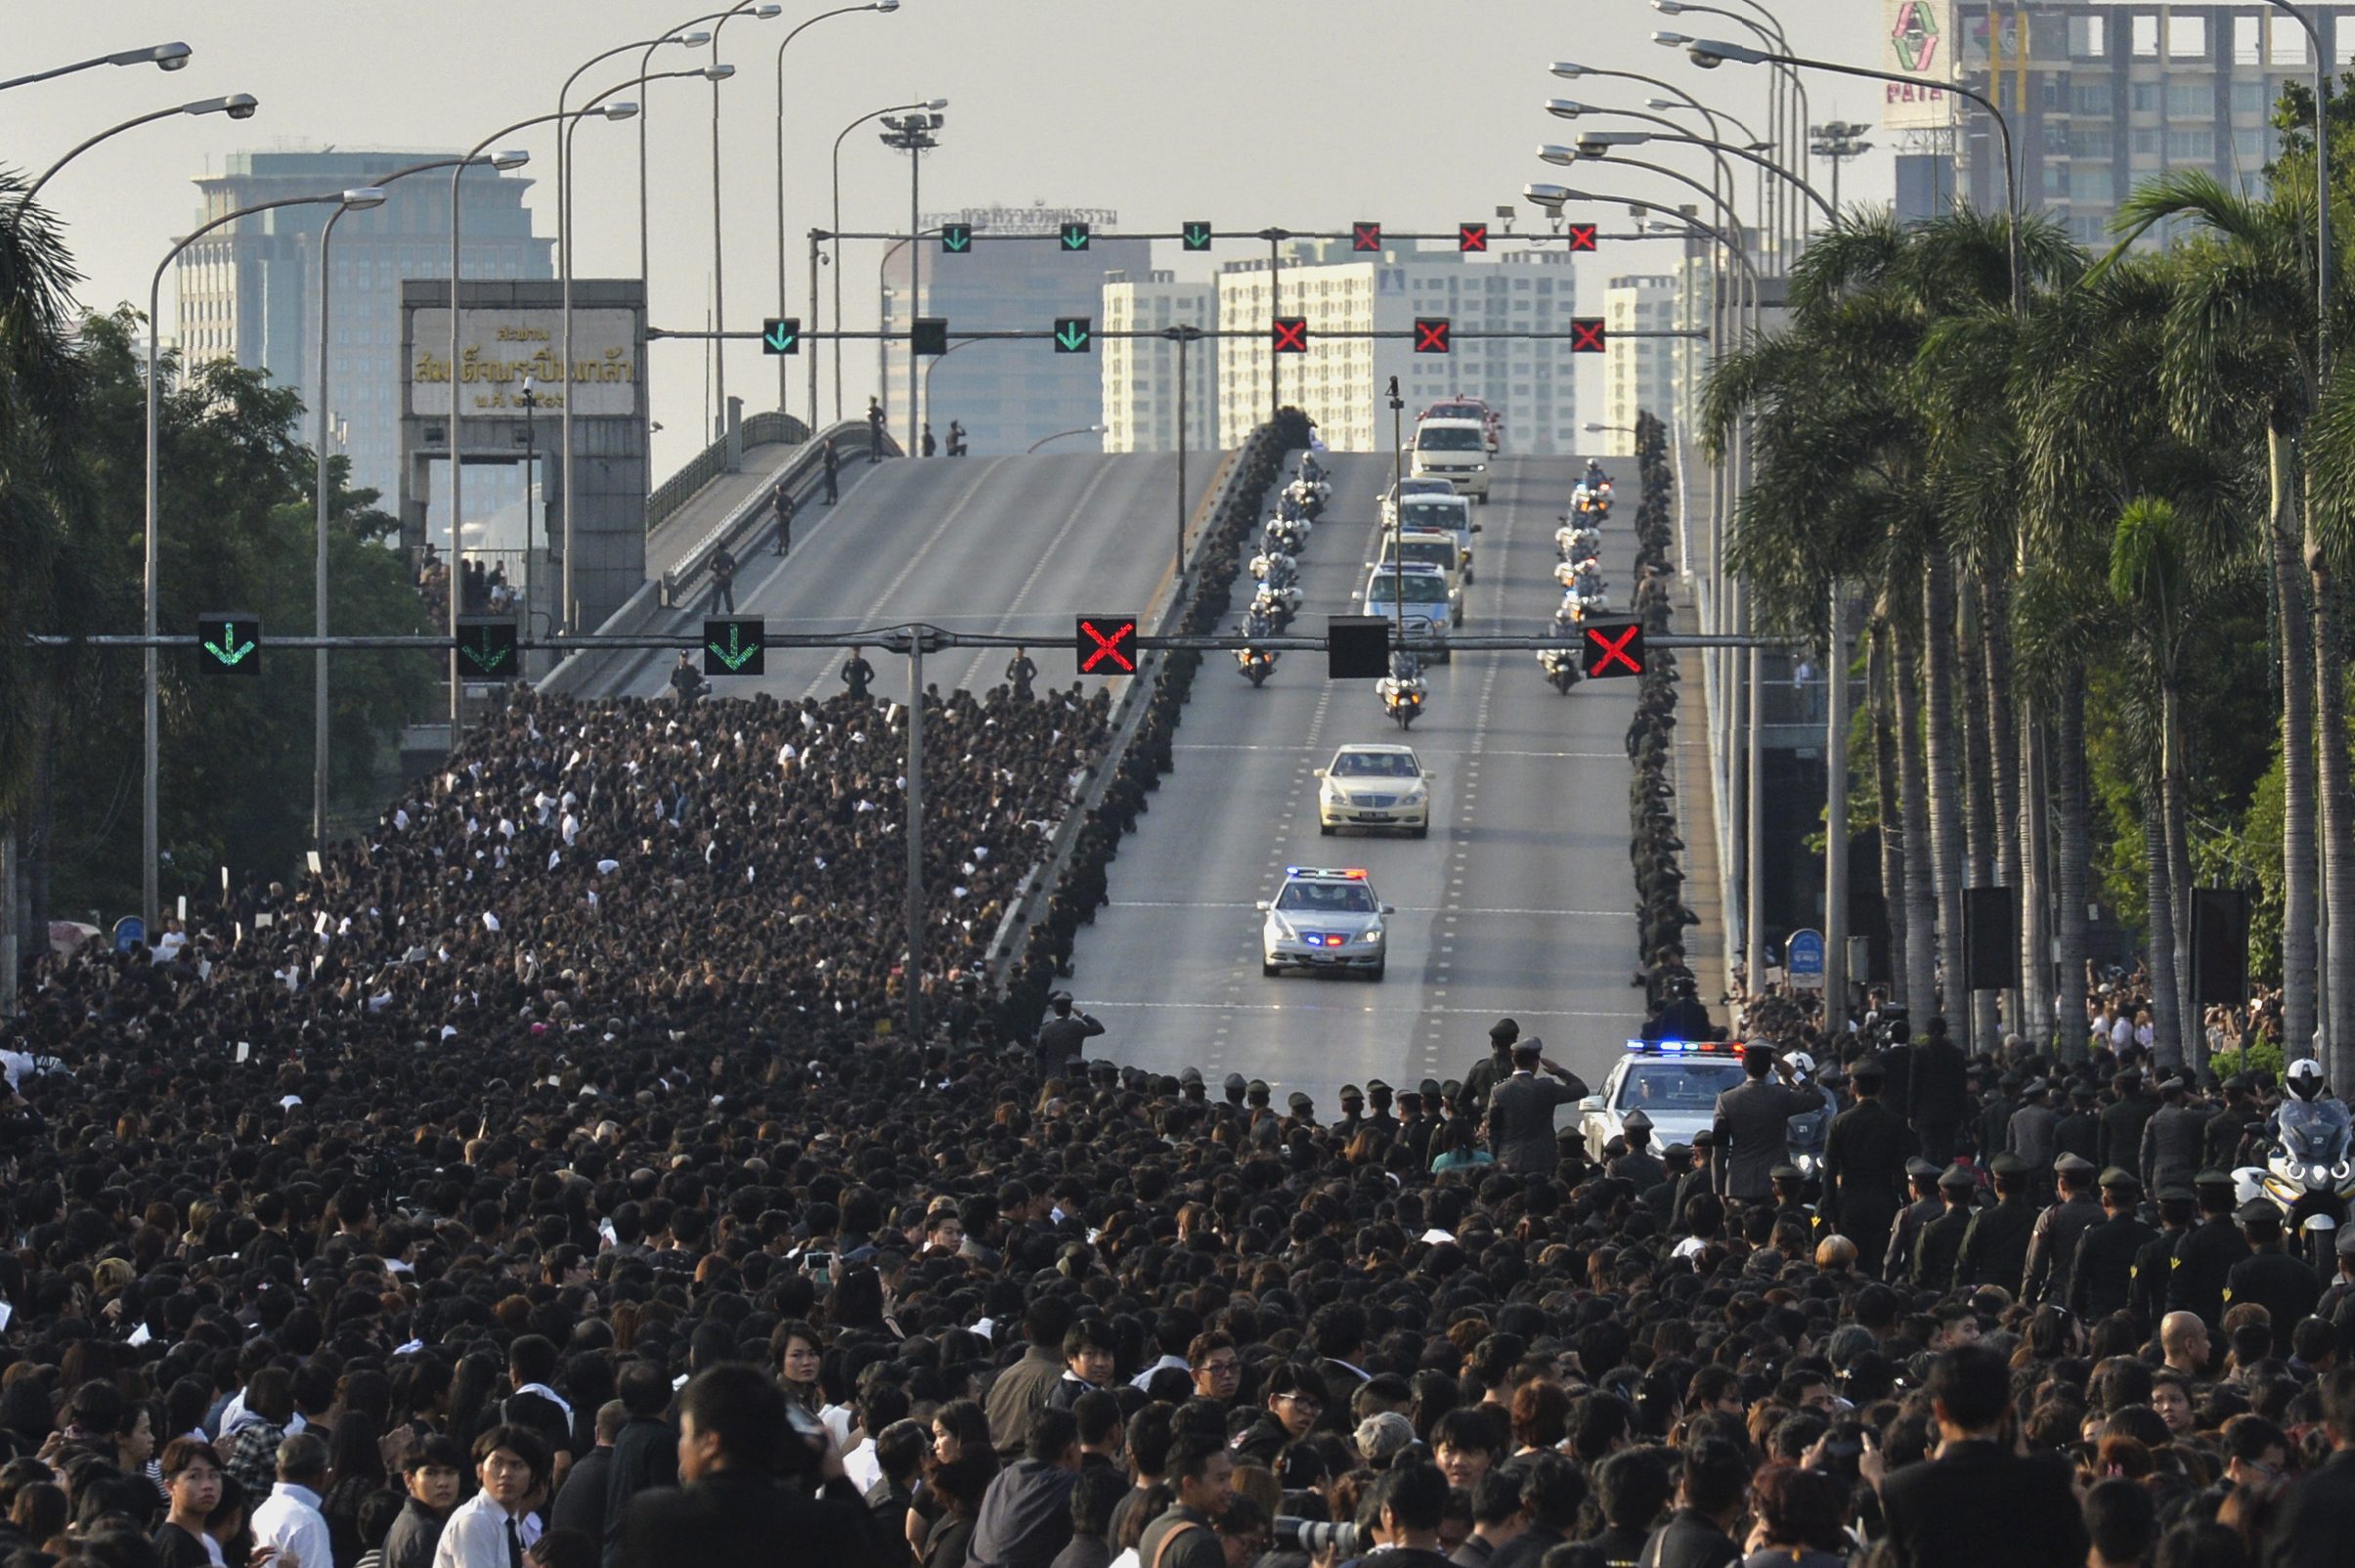 A van carries the body of Thai King Bhumibol Adulyadej's to his palace in Bangkok on October 14, 2016. Bhumibol, the world's longest-reigning monarch, passed away aged 88 on October 13, 2016 after years of ill health, removing a stabilising father figure from a country where political tensions remain two years after a military coup. / AFP PHOTO / MUNIR UZ ZAMAN